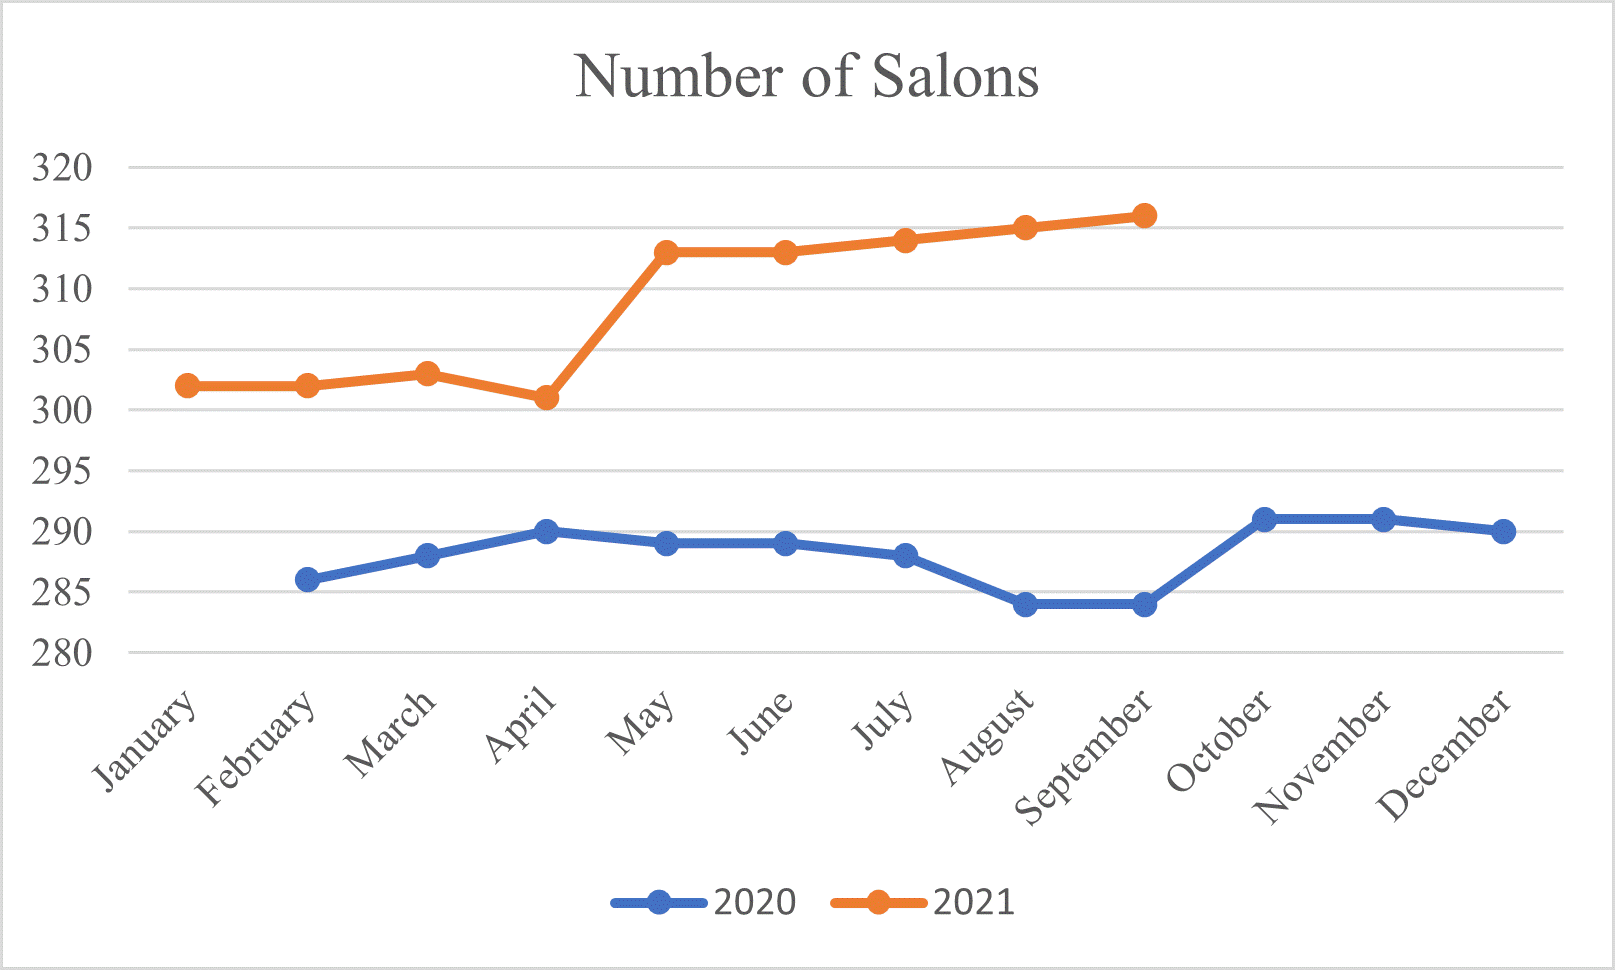 Number of Salons